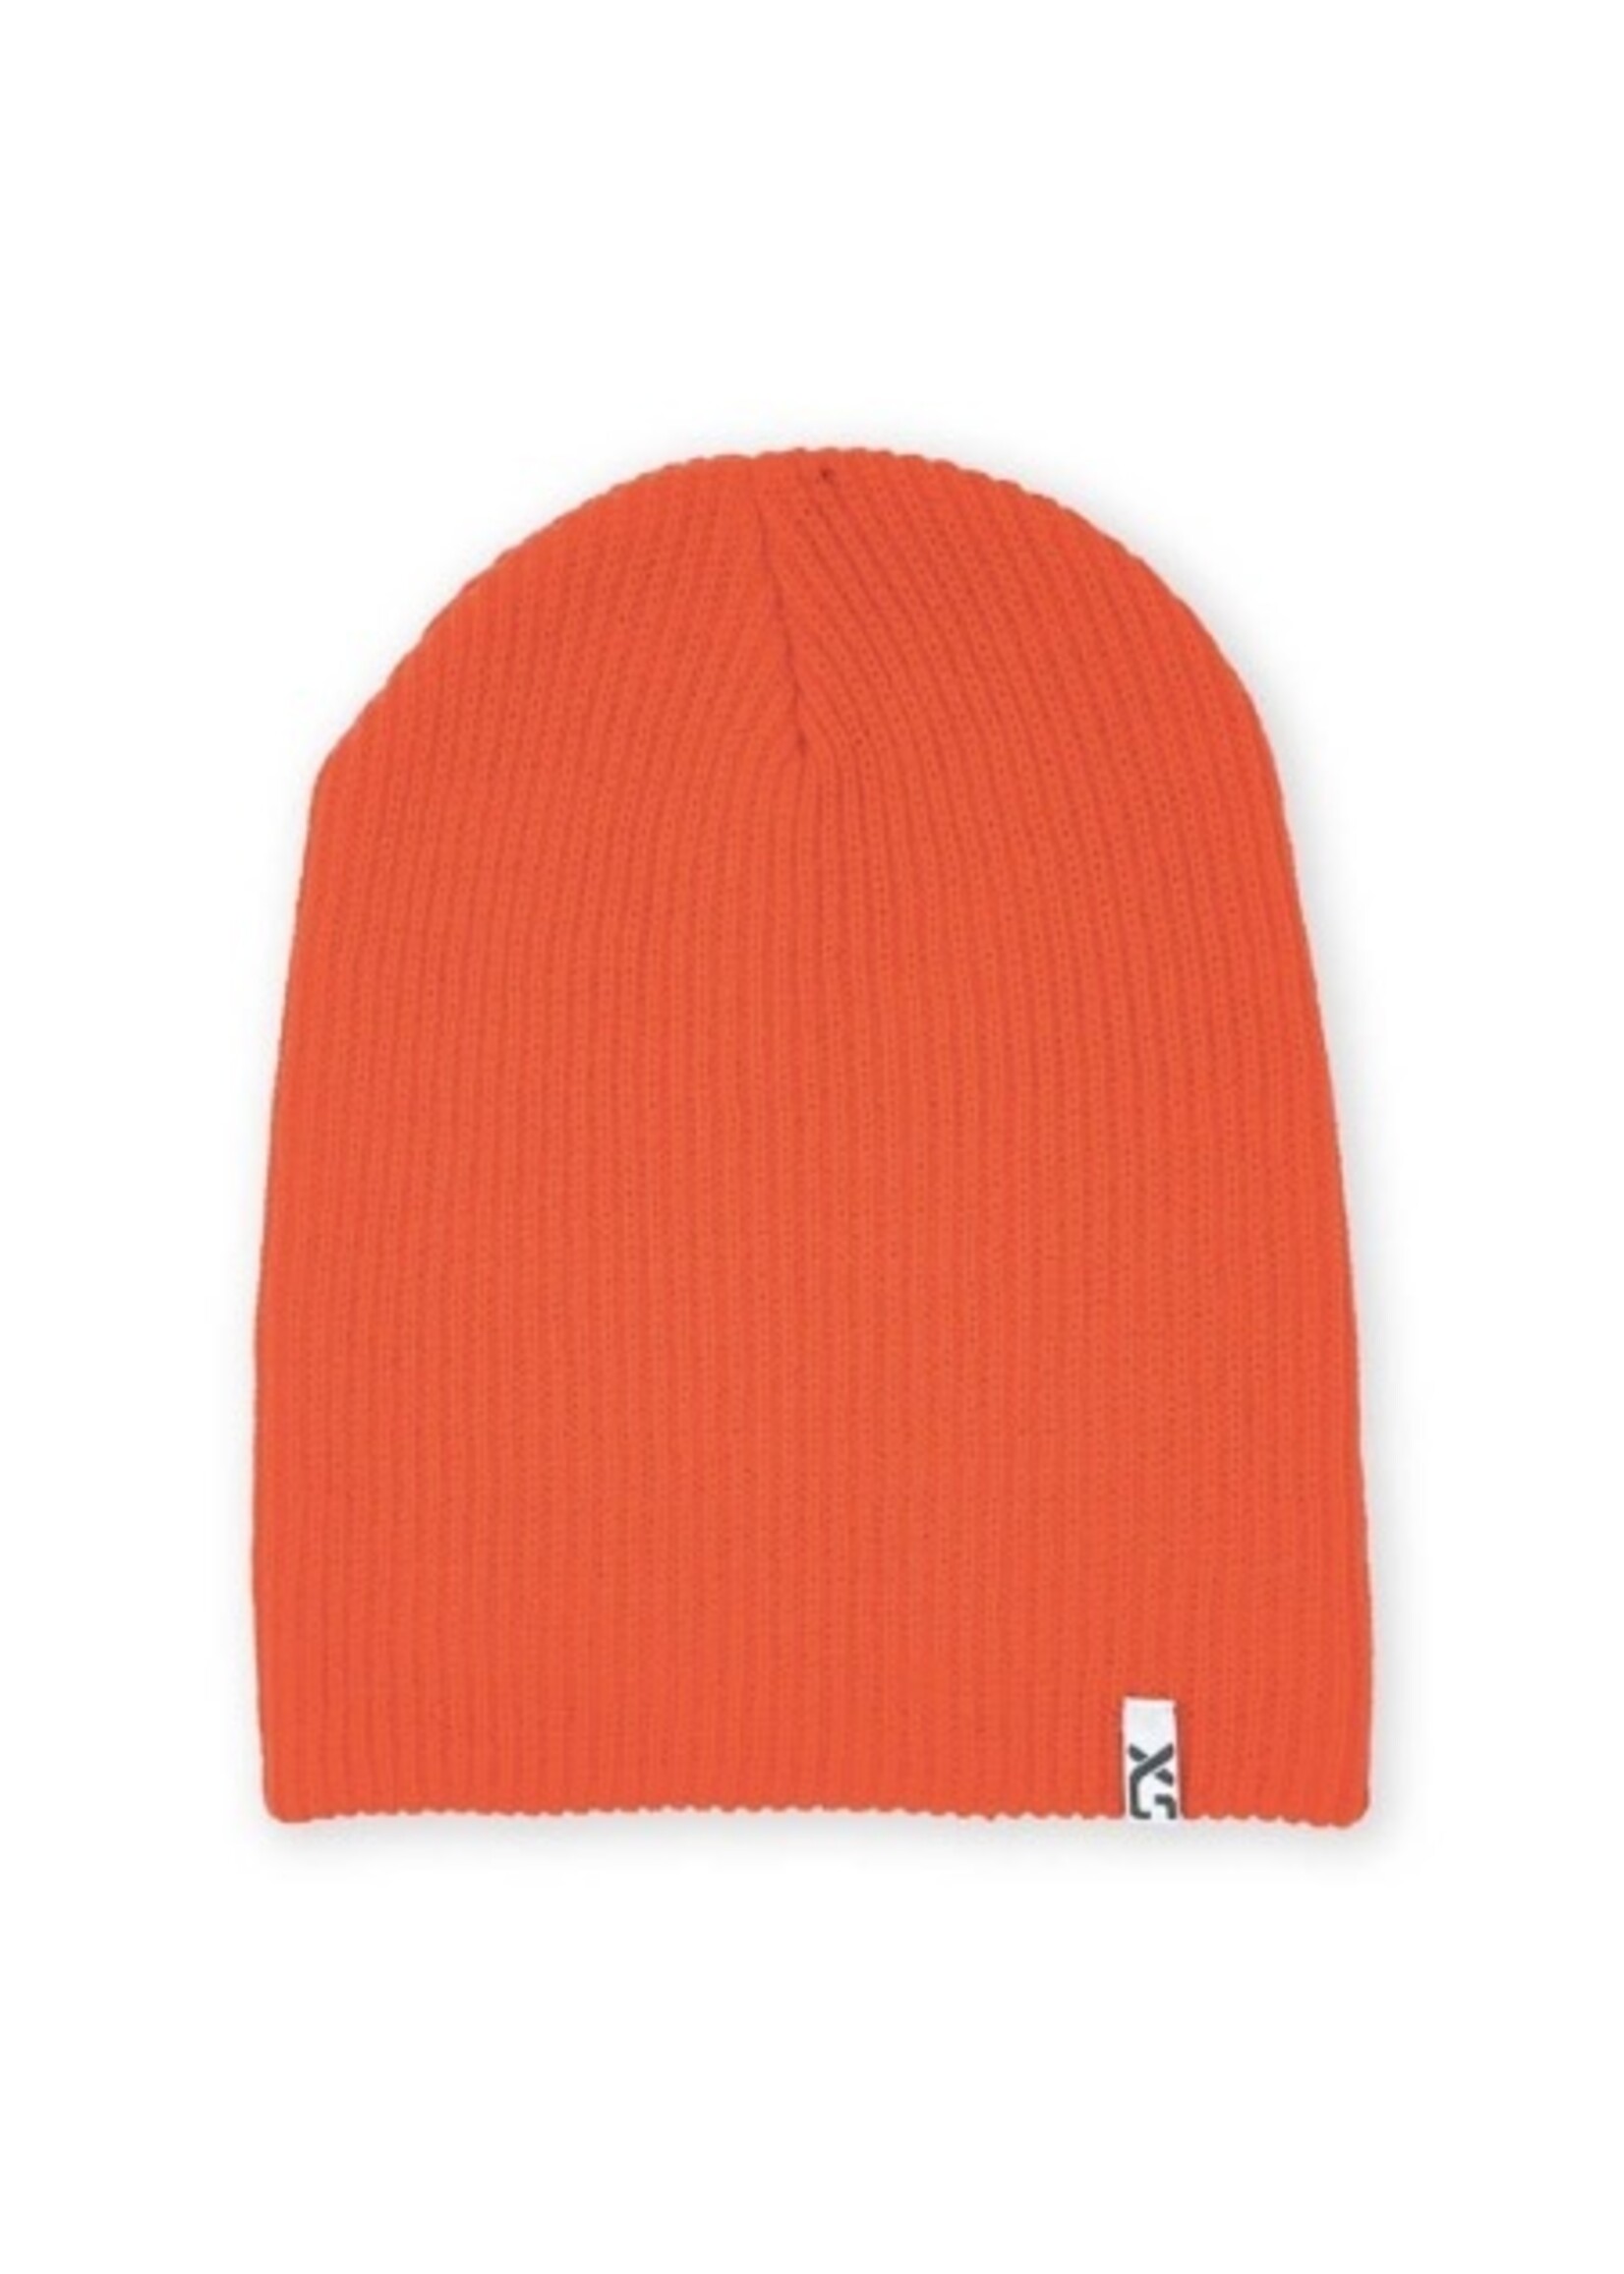 XS Unified Acrylic beanies by XS Unified